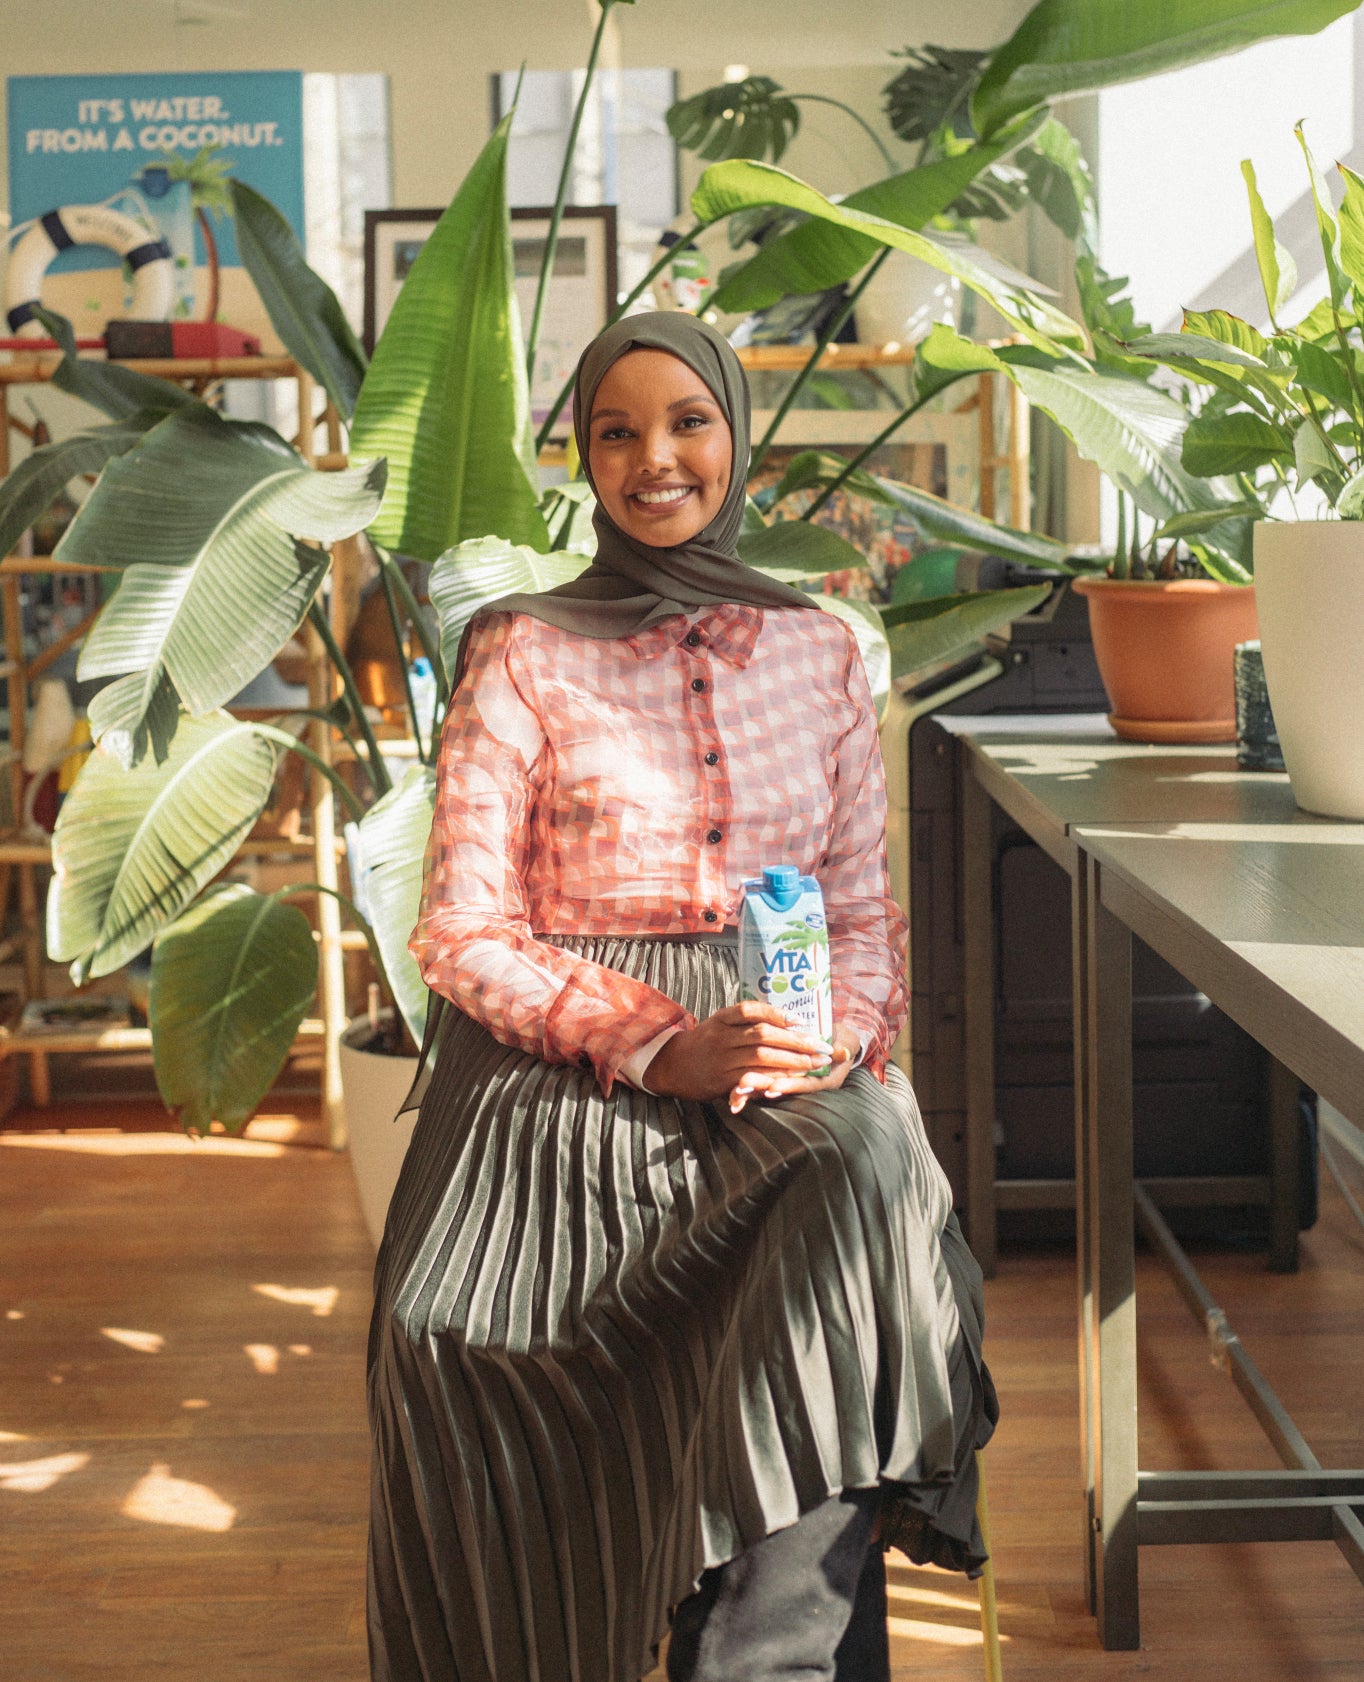 Halima Aden Shares Her Activism Story, On International Day Of The Girl Child